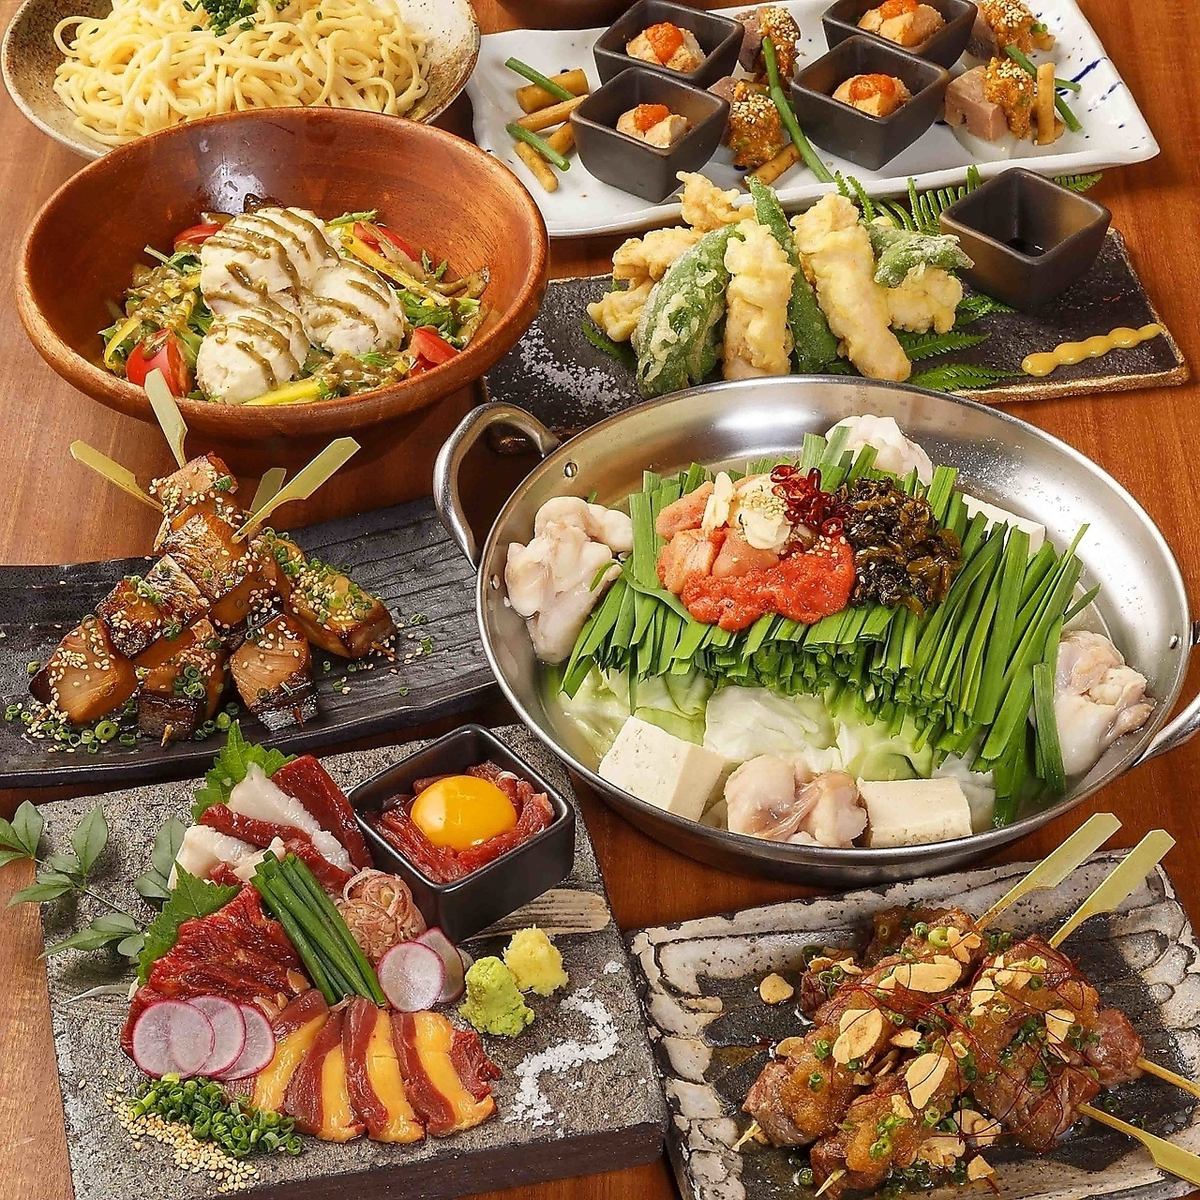 Enjoy Hakata cuisine and a wide variety of all-you-can-drink 3-hour courses starting at 3,000 yen